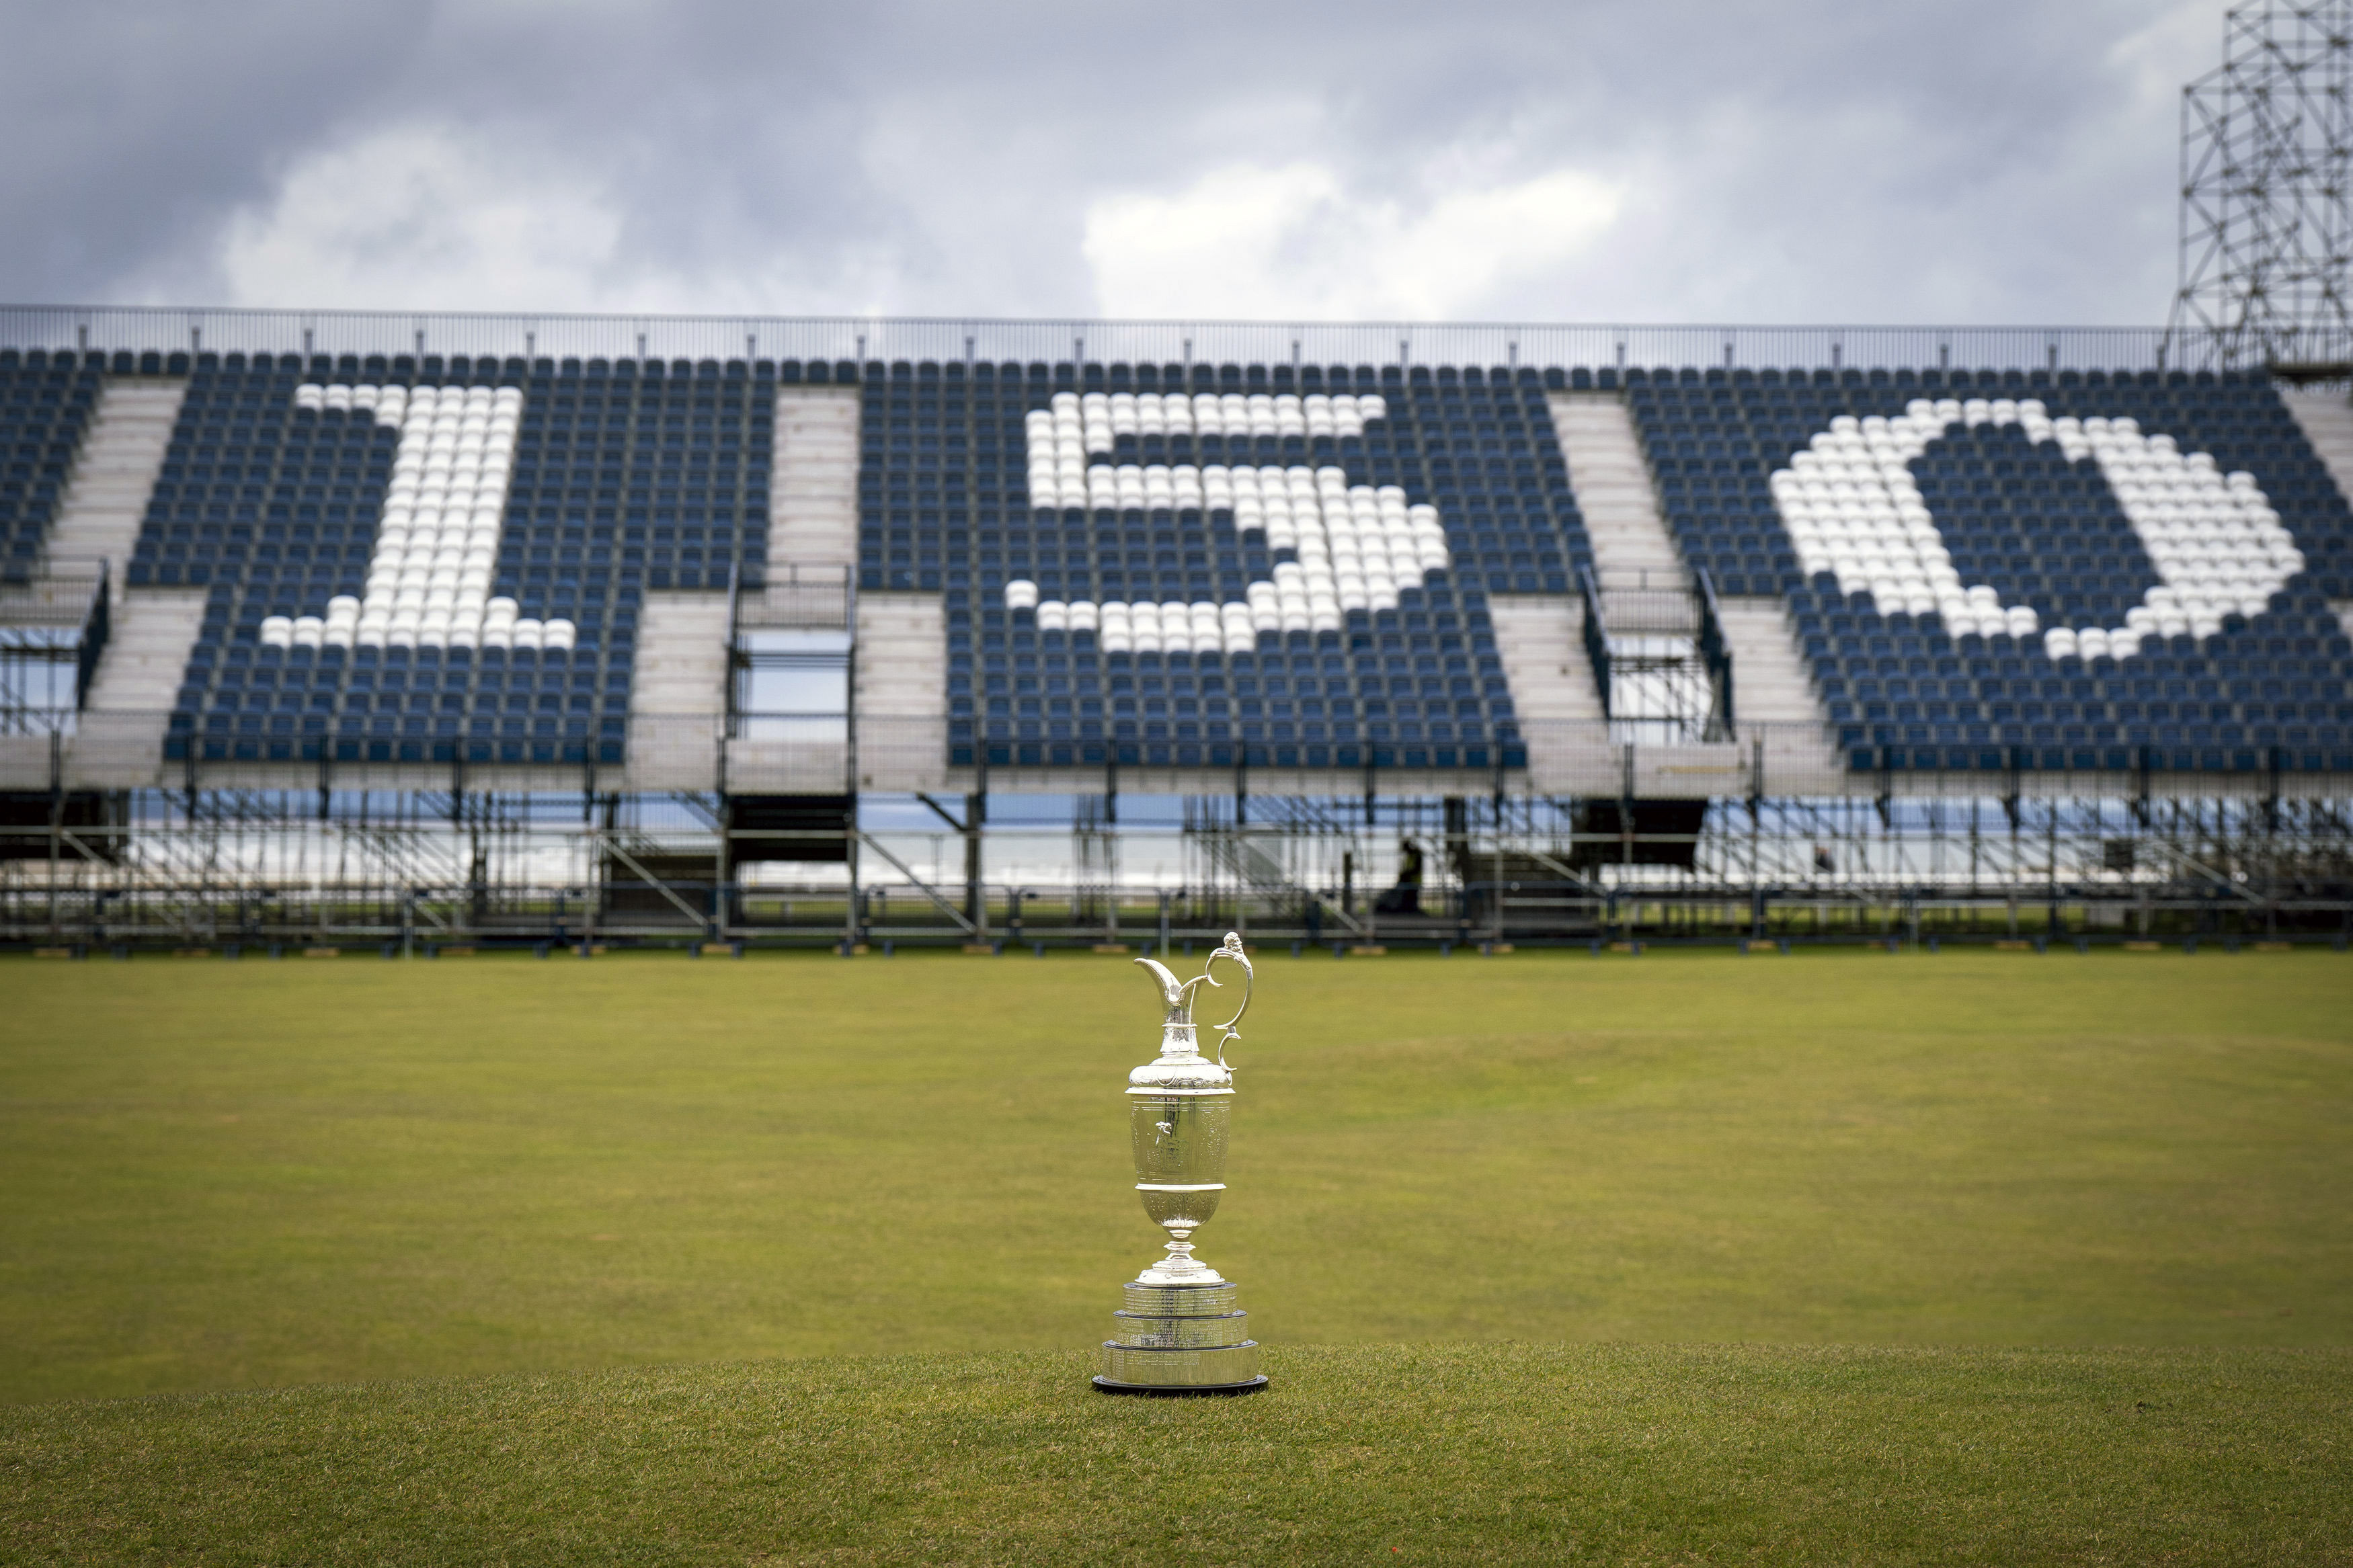 British Open at St. Andrews all about adding to rich history